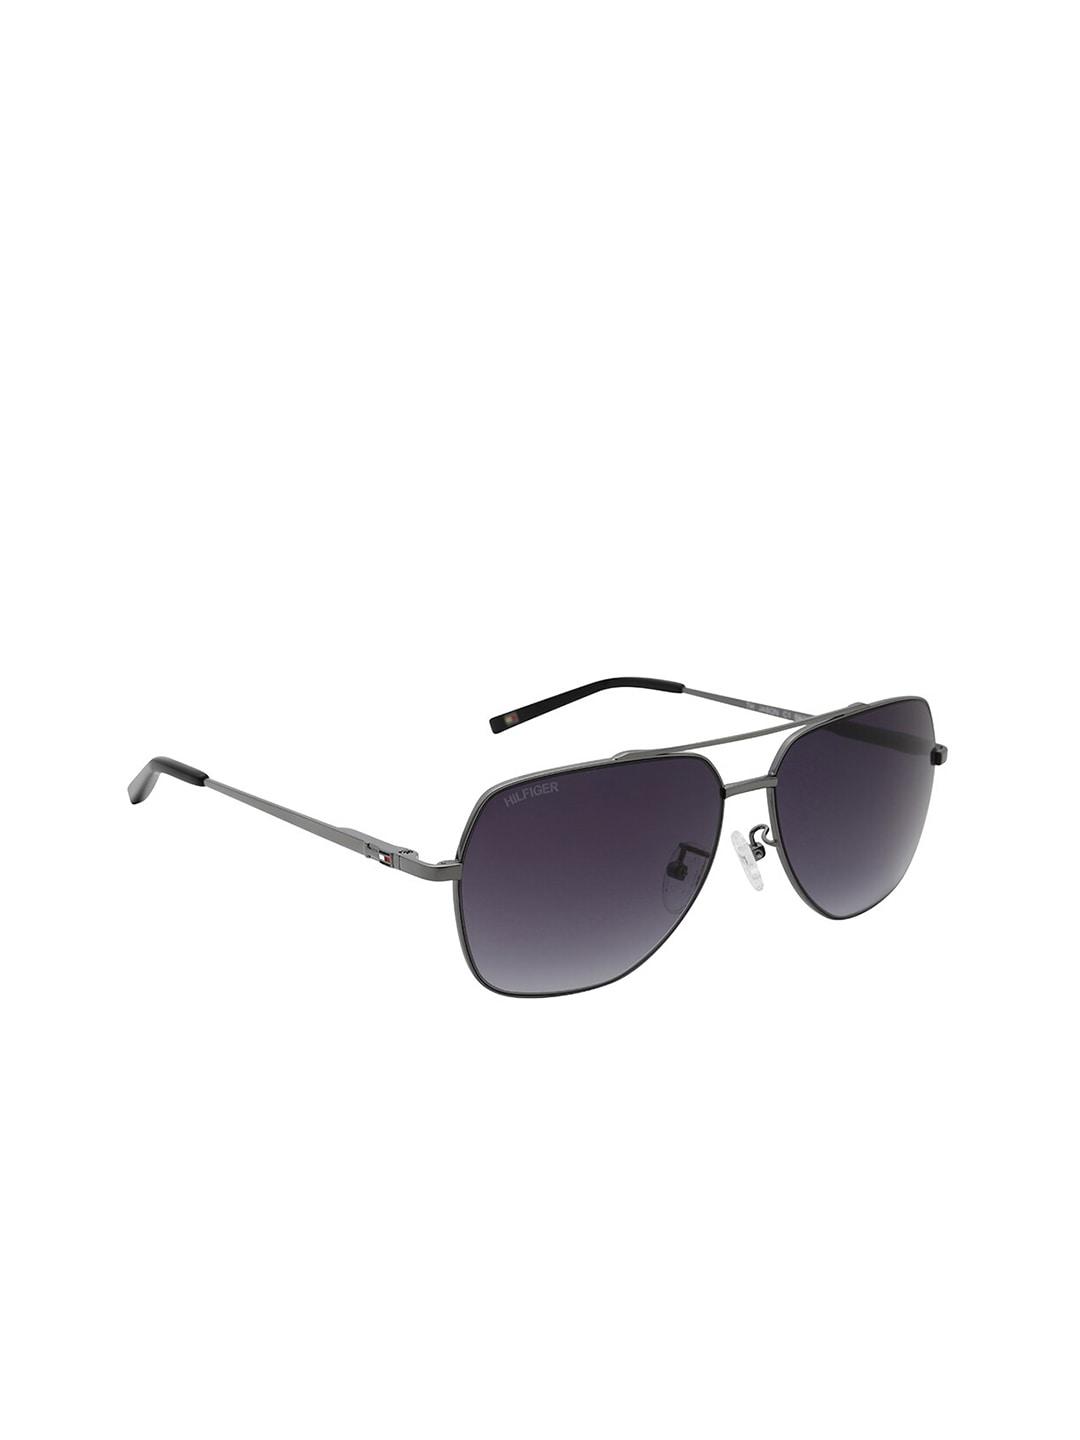 tommy hilfiger men grey lens & gunmetal-toned square sunglasses with uv protected lens